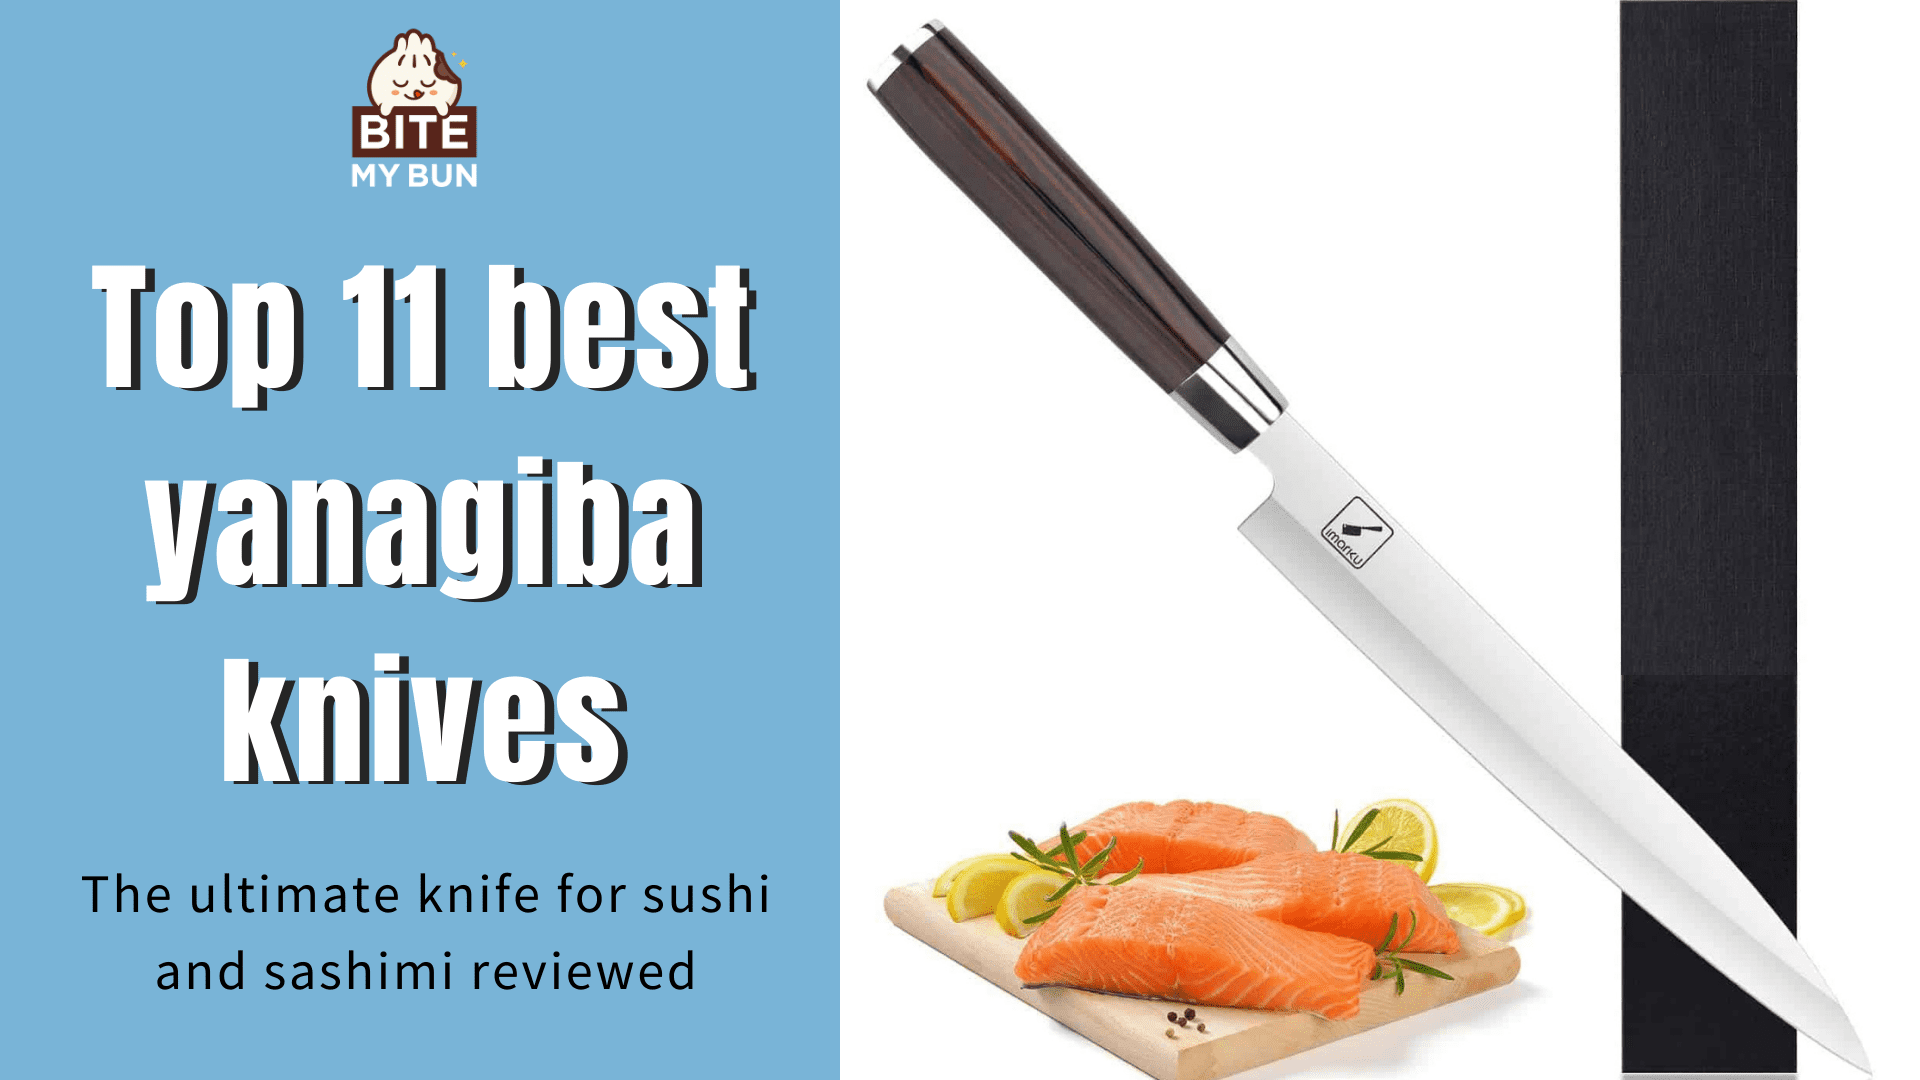 Top 11 best yanagiba knives | The ultimate knife for sushi and sashimi reviewed